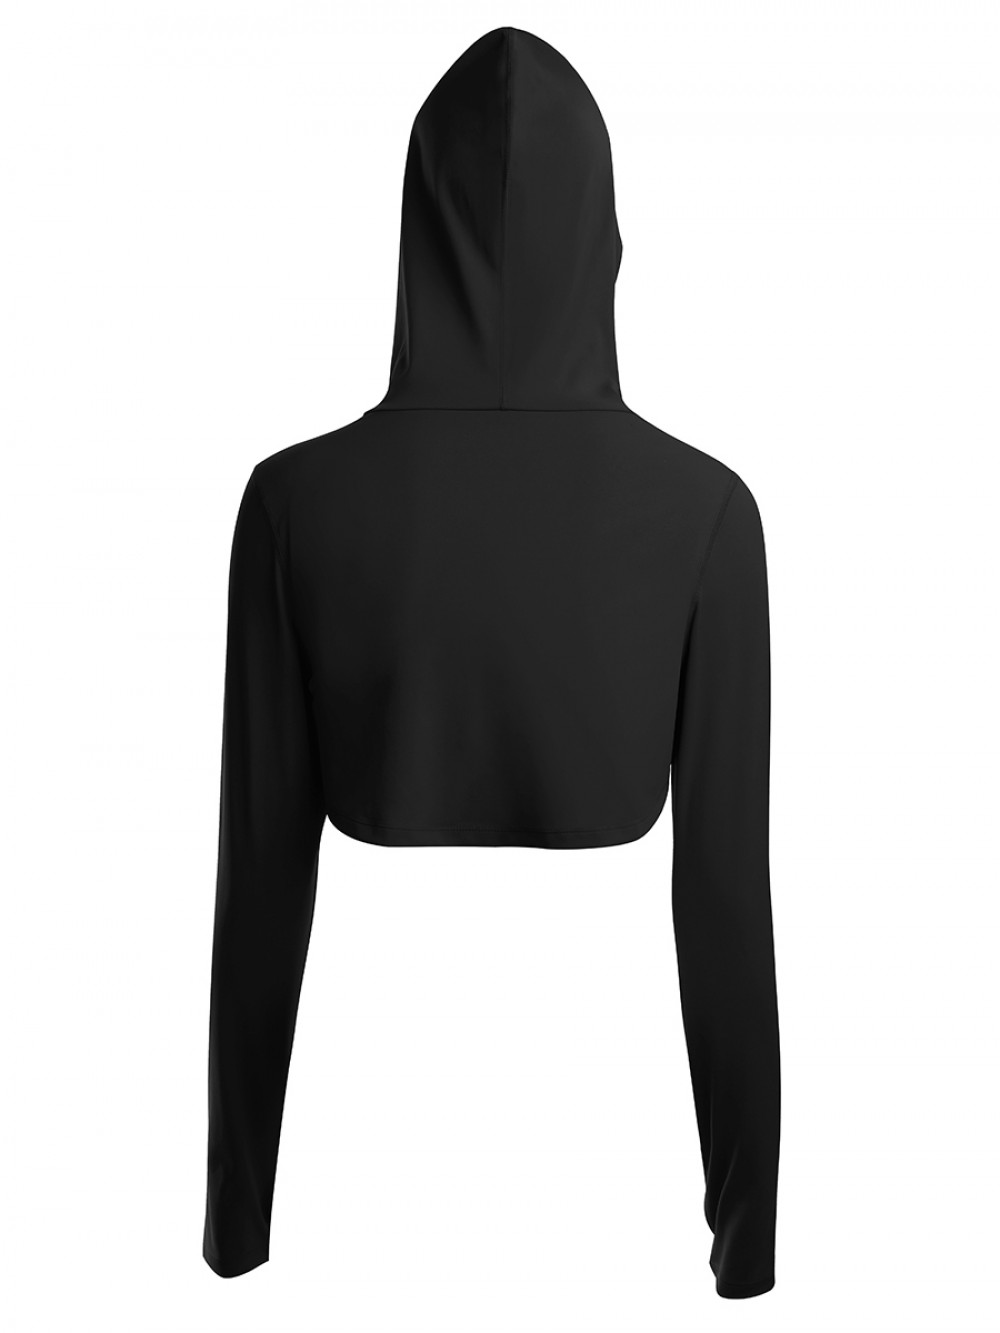 Black Hooded Neck Detachable Cups Crop Top For Exercising